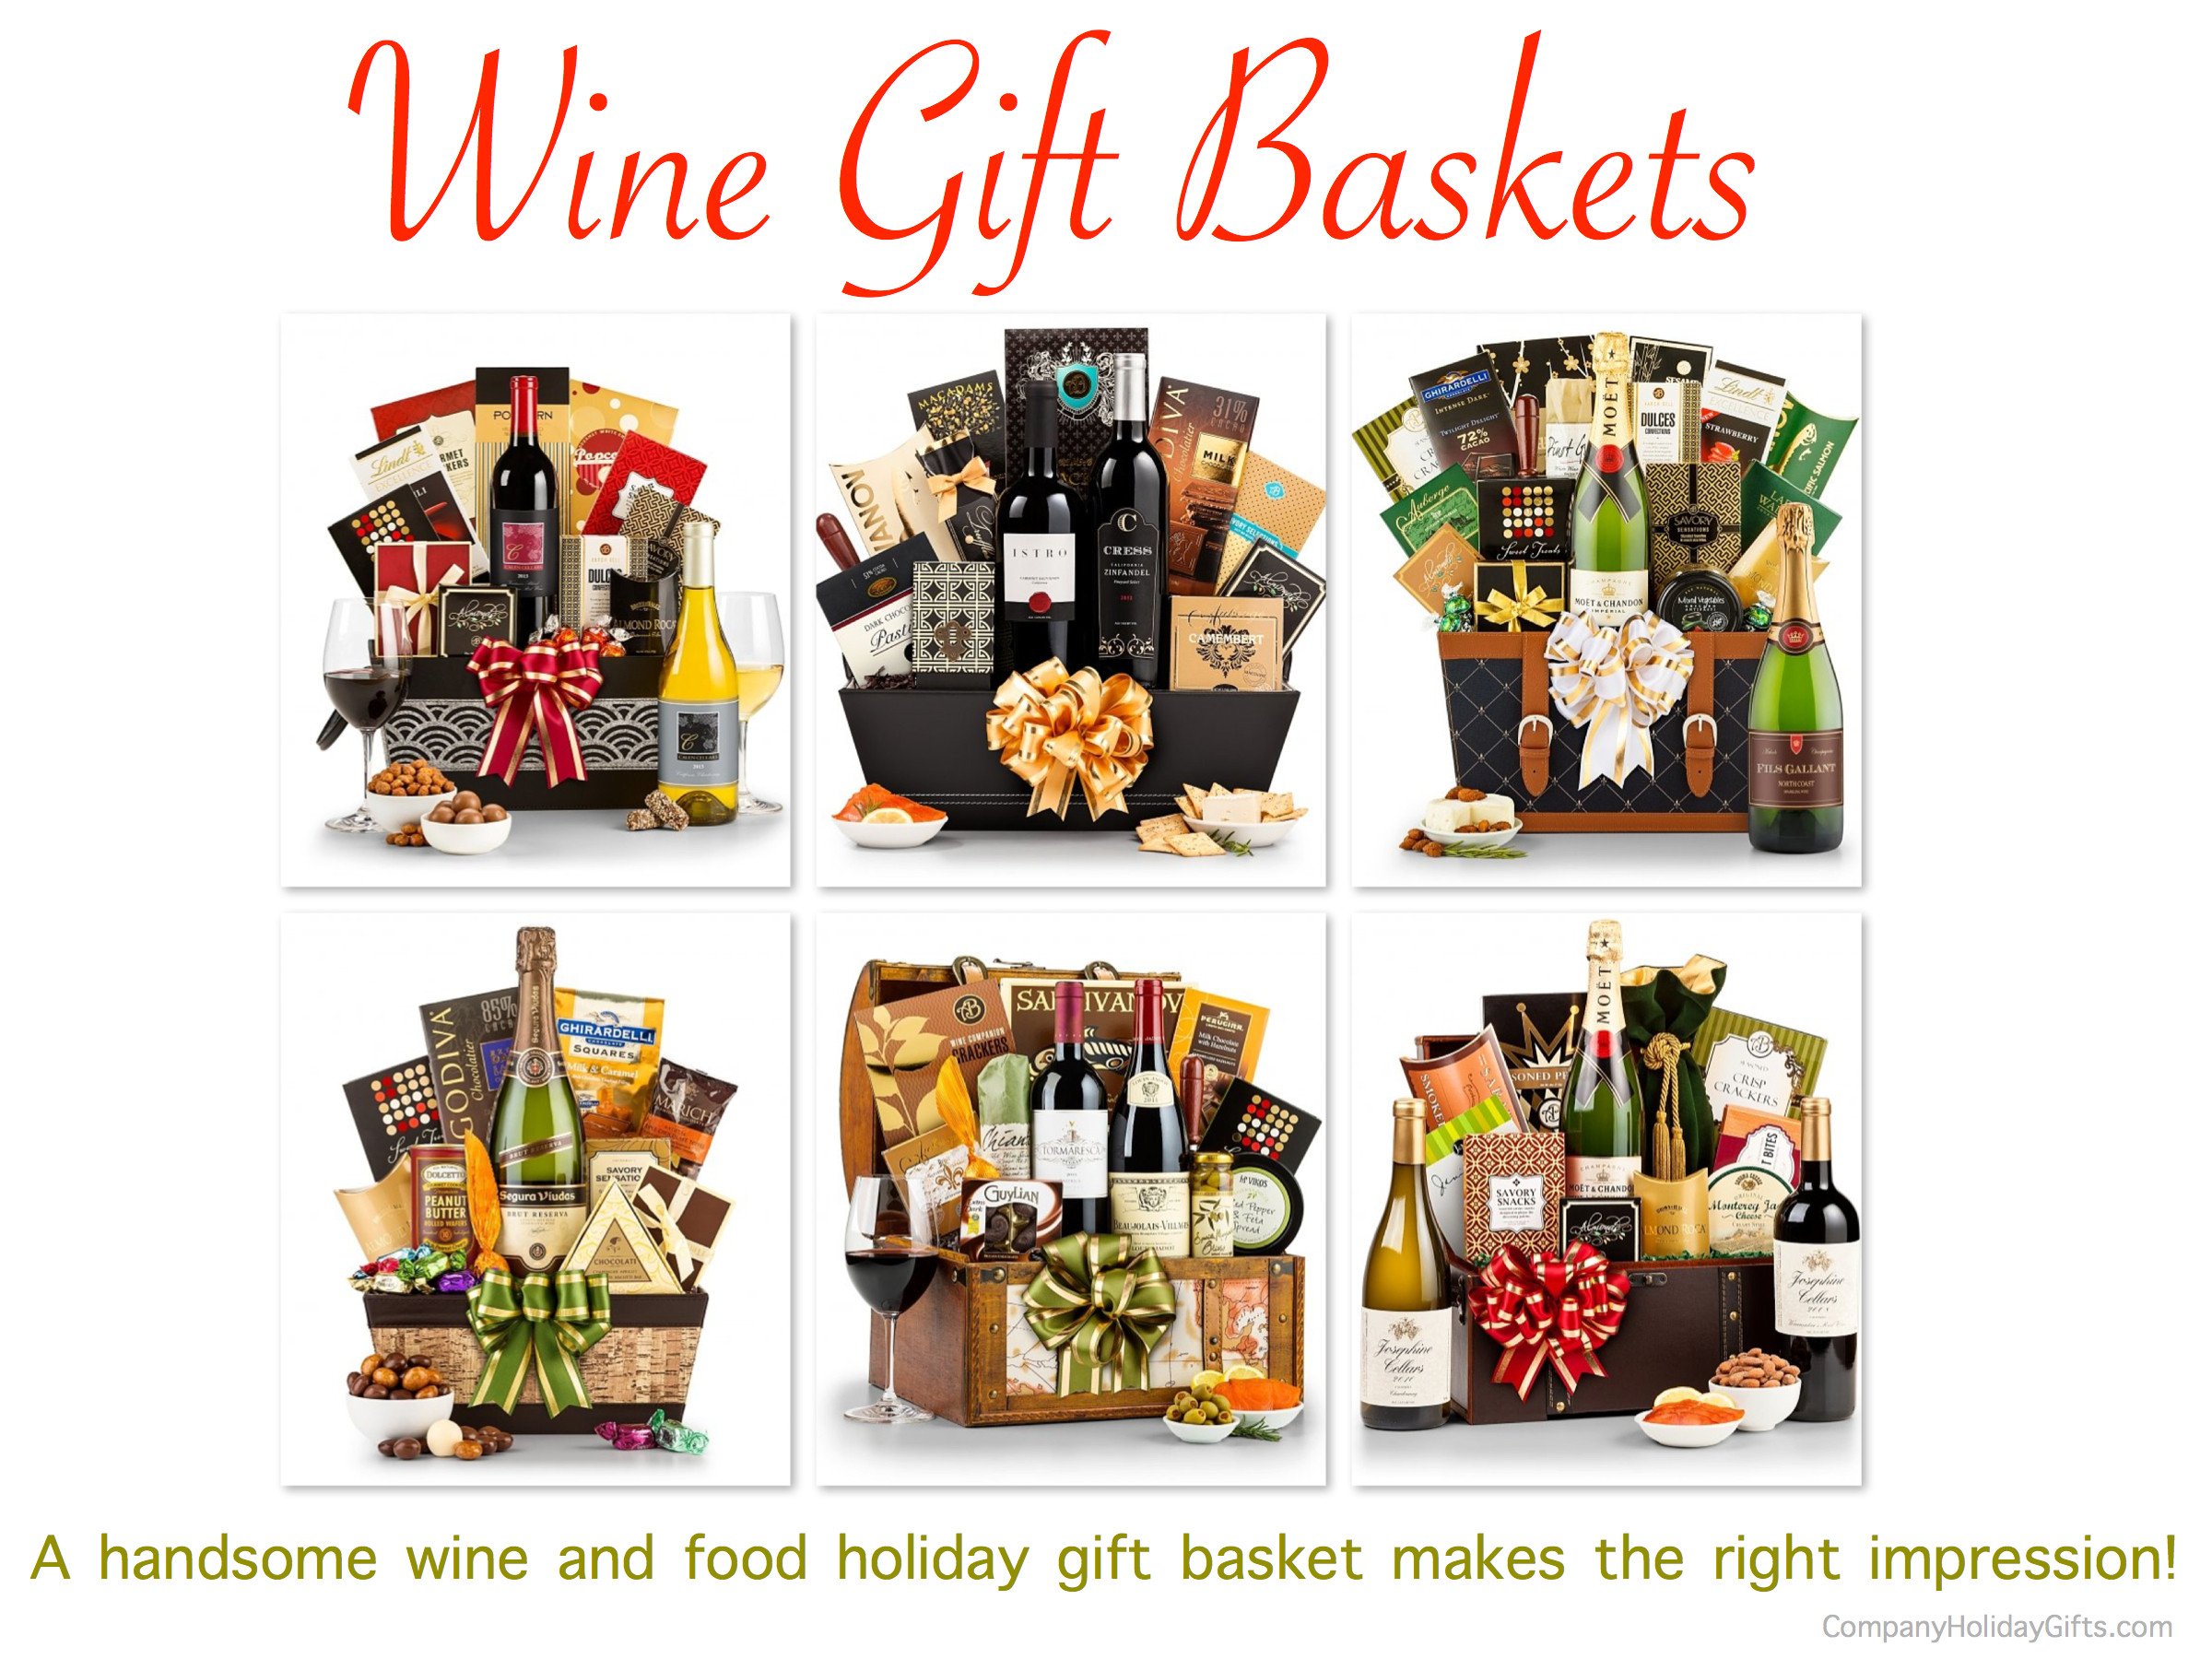 Corporate Holiday Gift Ideas For Clients
 Best Holiday Gifts for Business Associates & Clients